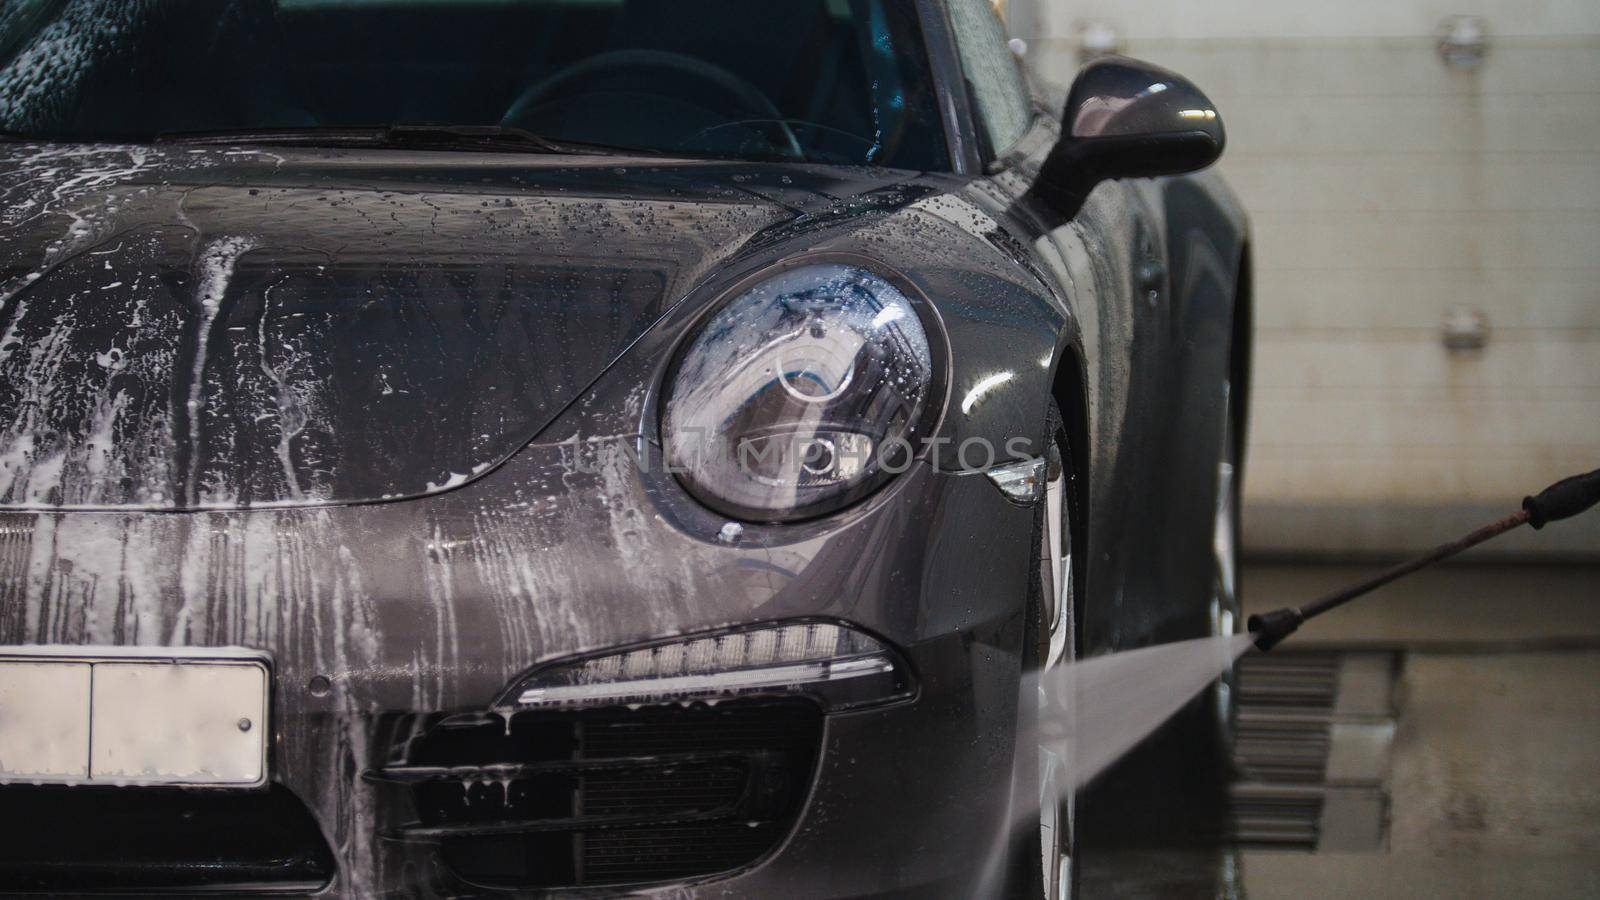 Washing a luxury car in the suds - telephoto by Studia72